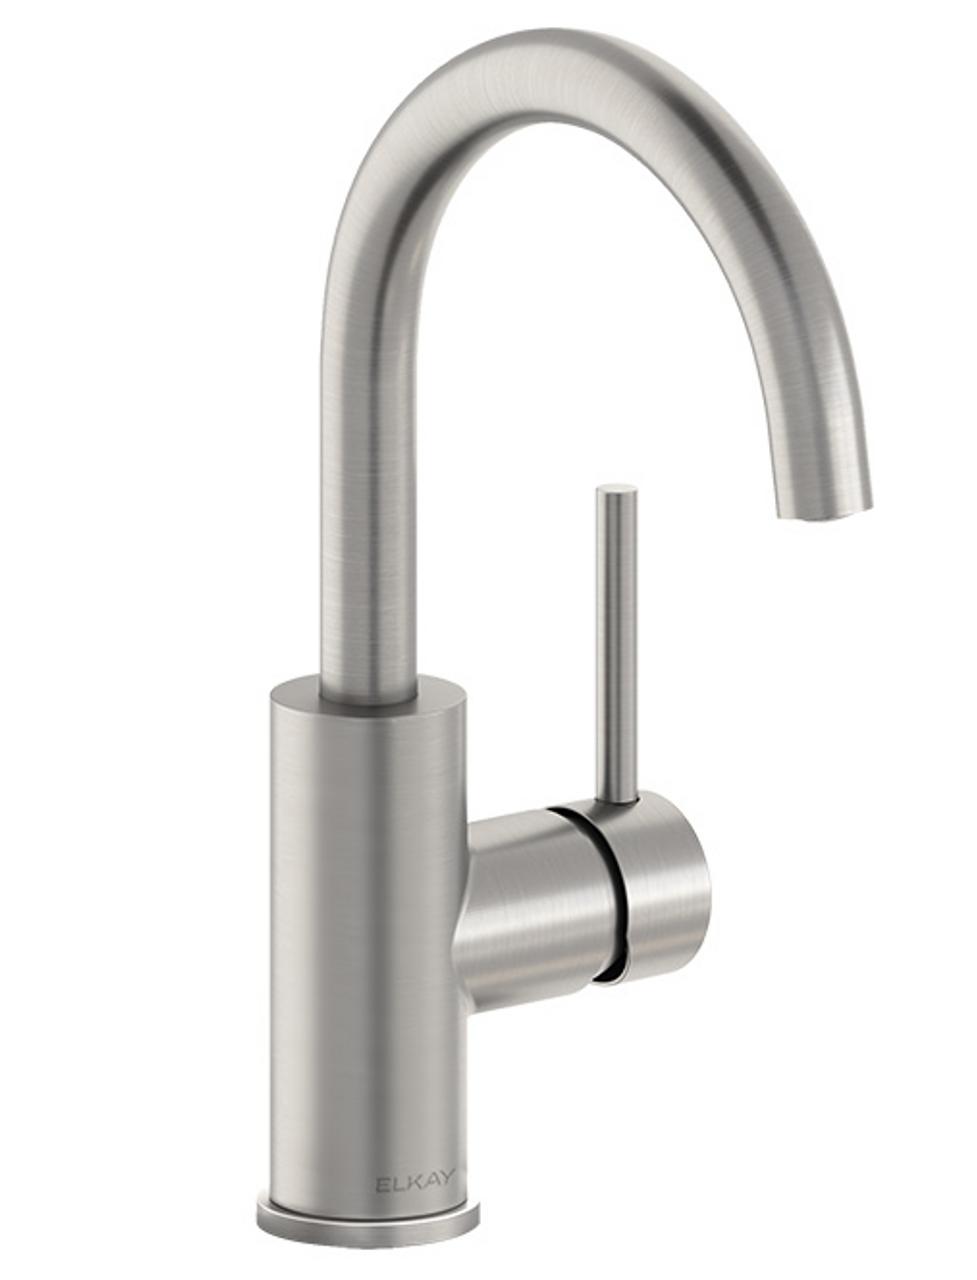 Deck Mounted 1 Hole Bar Faucet | Watermark Designs